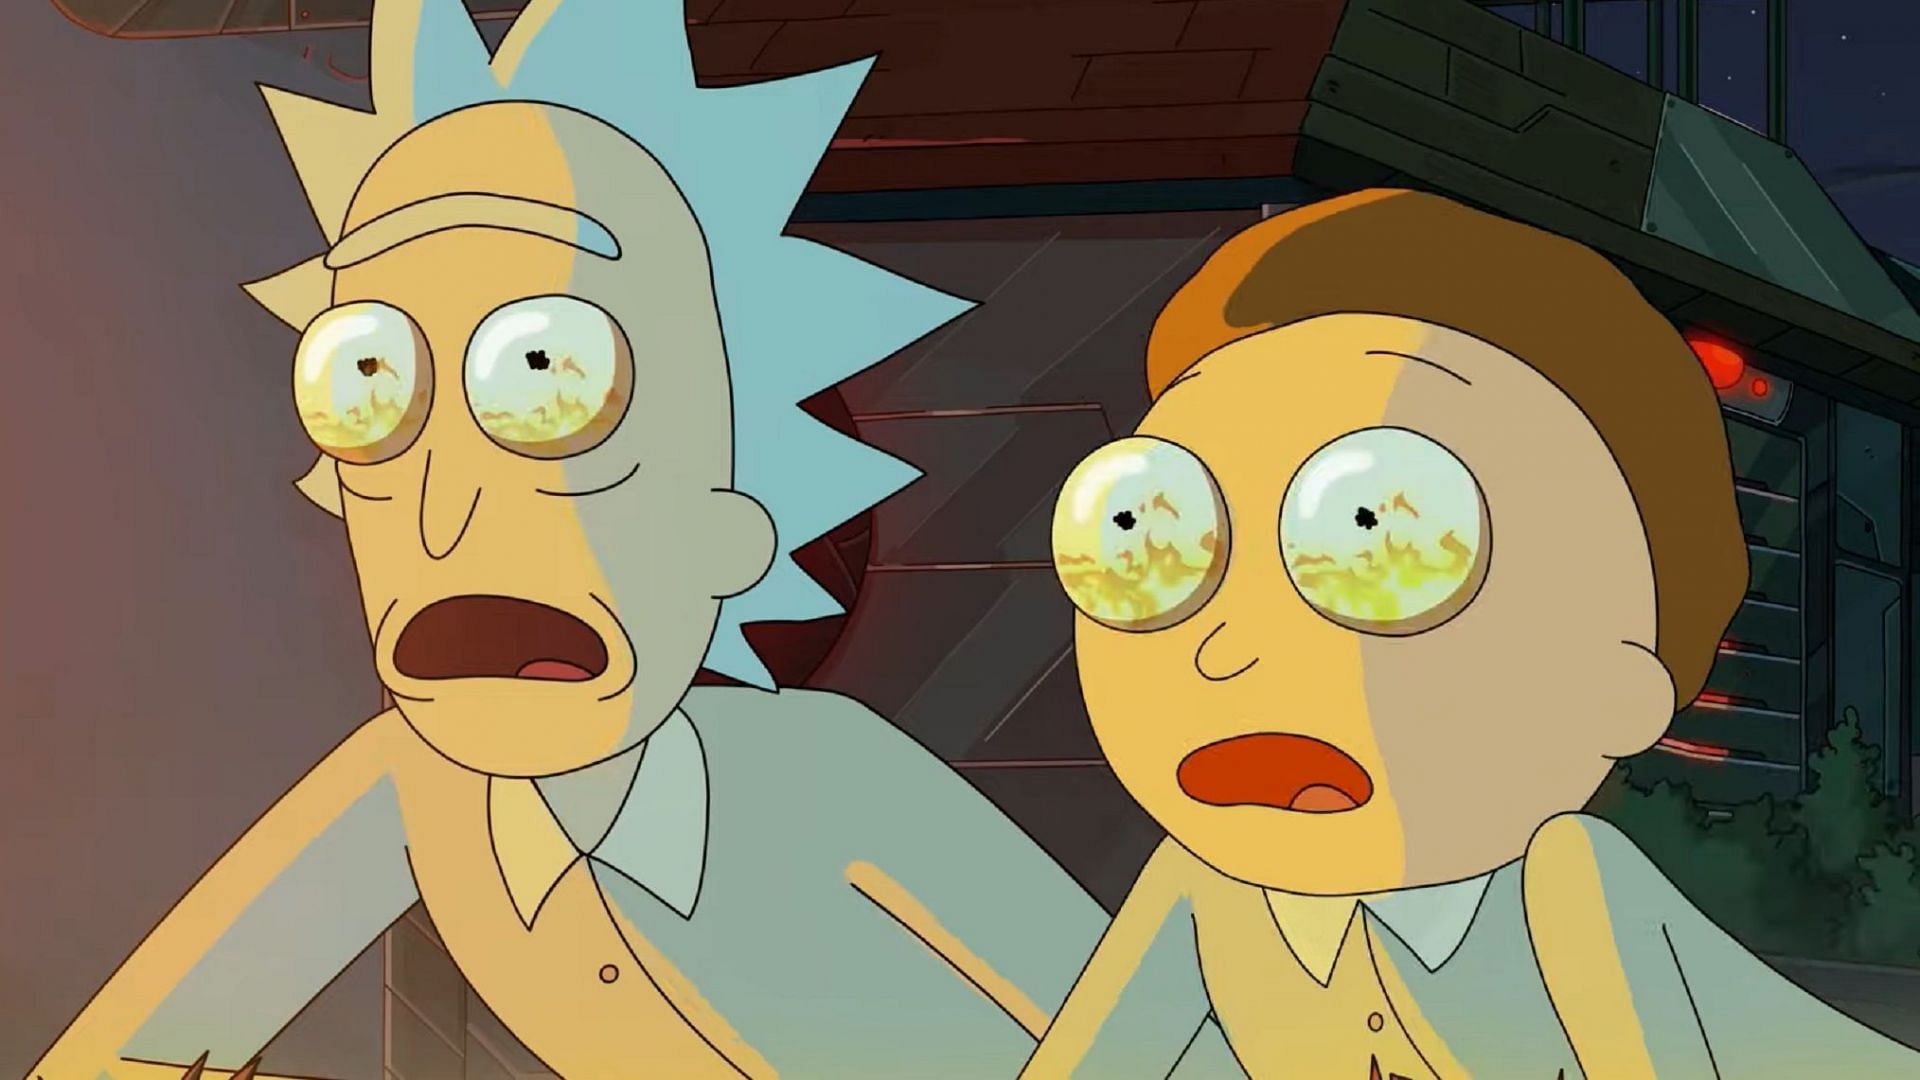 The future of Rick and Morty in doubt as co-creator Justin Roiland faces domestic violence charges and Dan Harmon takes the lead (Image via Adult Swim)